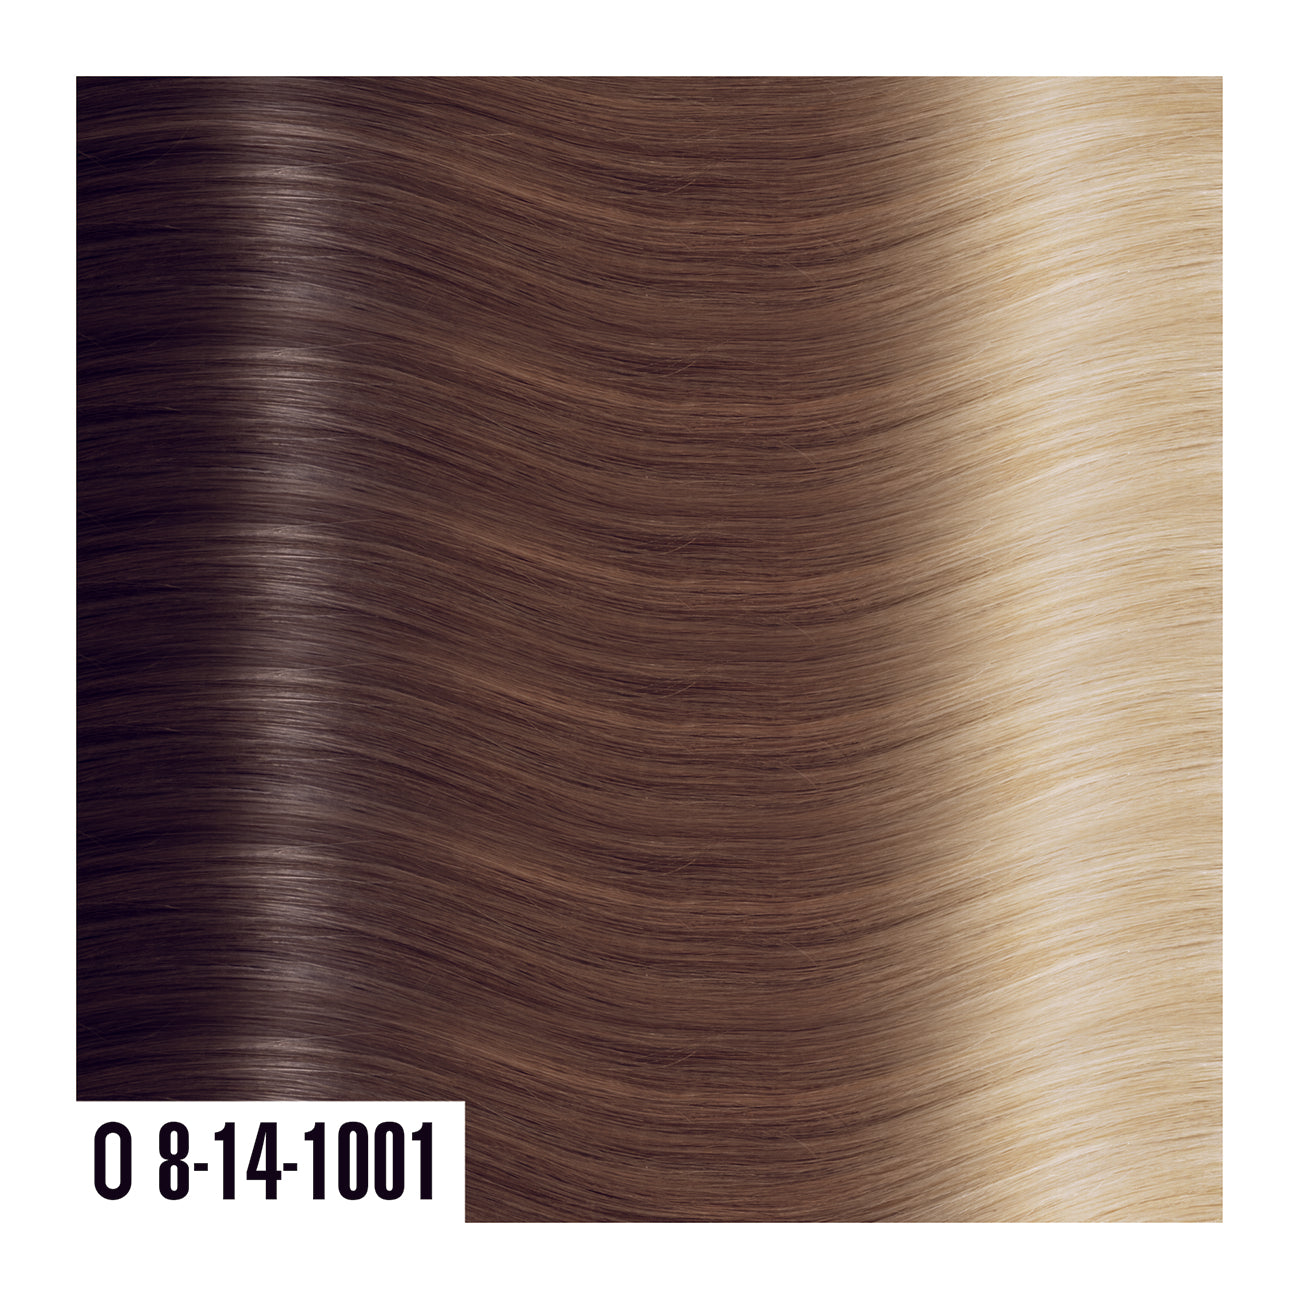 O8-14-1001 - Prime Tape In Medium brown into Blonde - Ombre colors are a beautiful gradual blend of 3 colors with darker roots and lighter ends.  